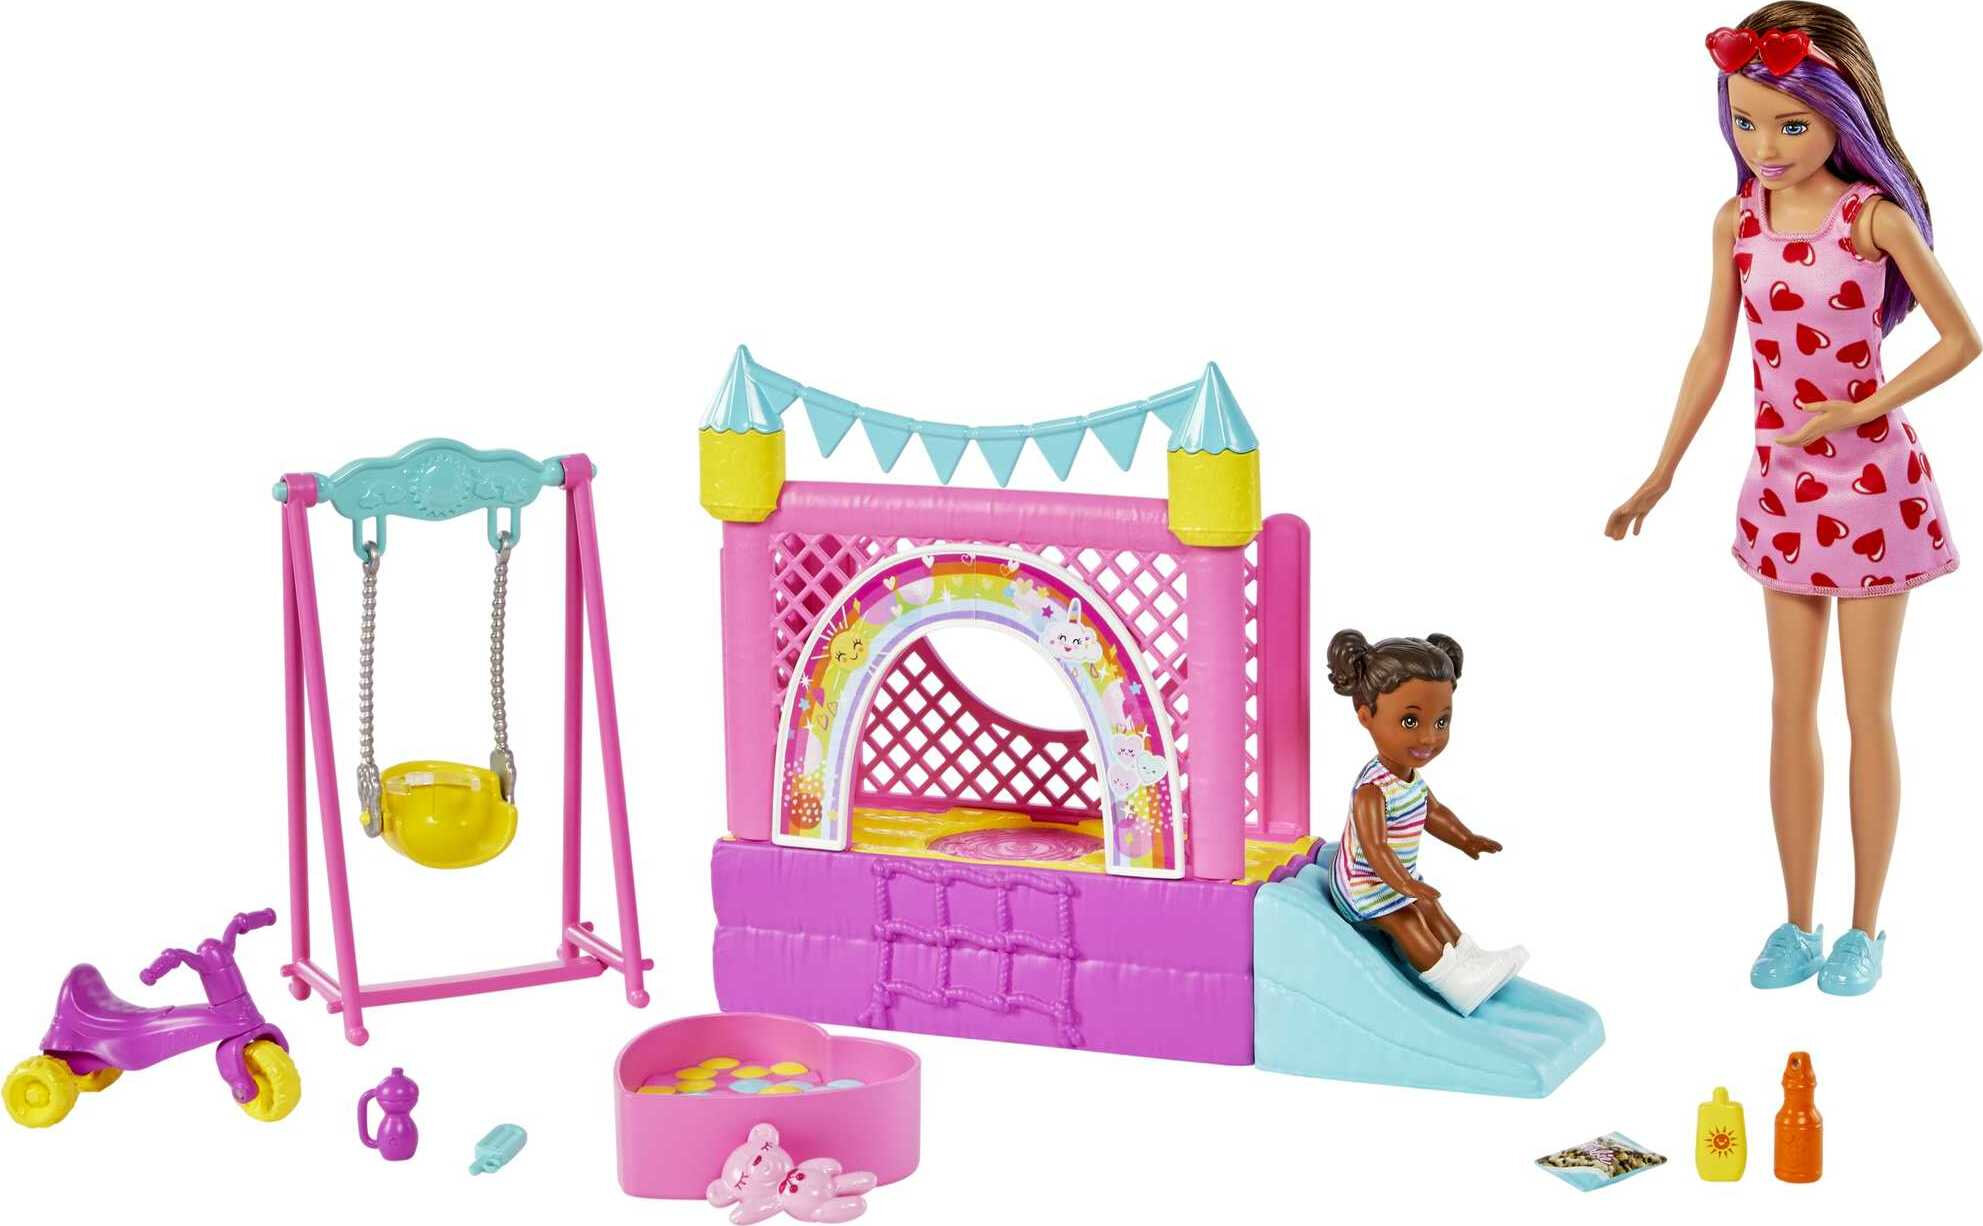 Barbie Skipper Babysitters Inc Bounce House Playset, Skipper Doll, Toddler Small Doll & Accessories - image 1 of 7